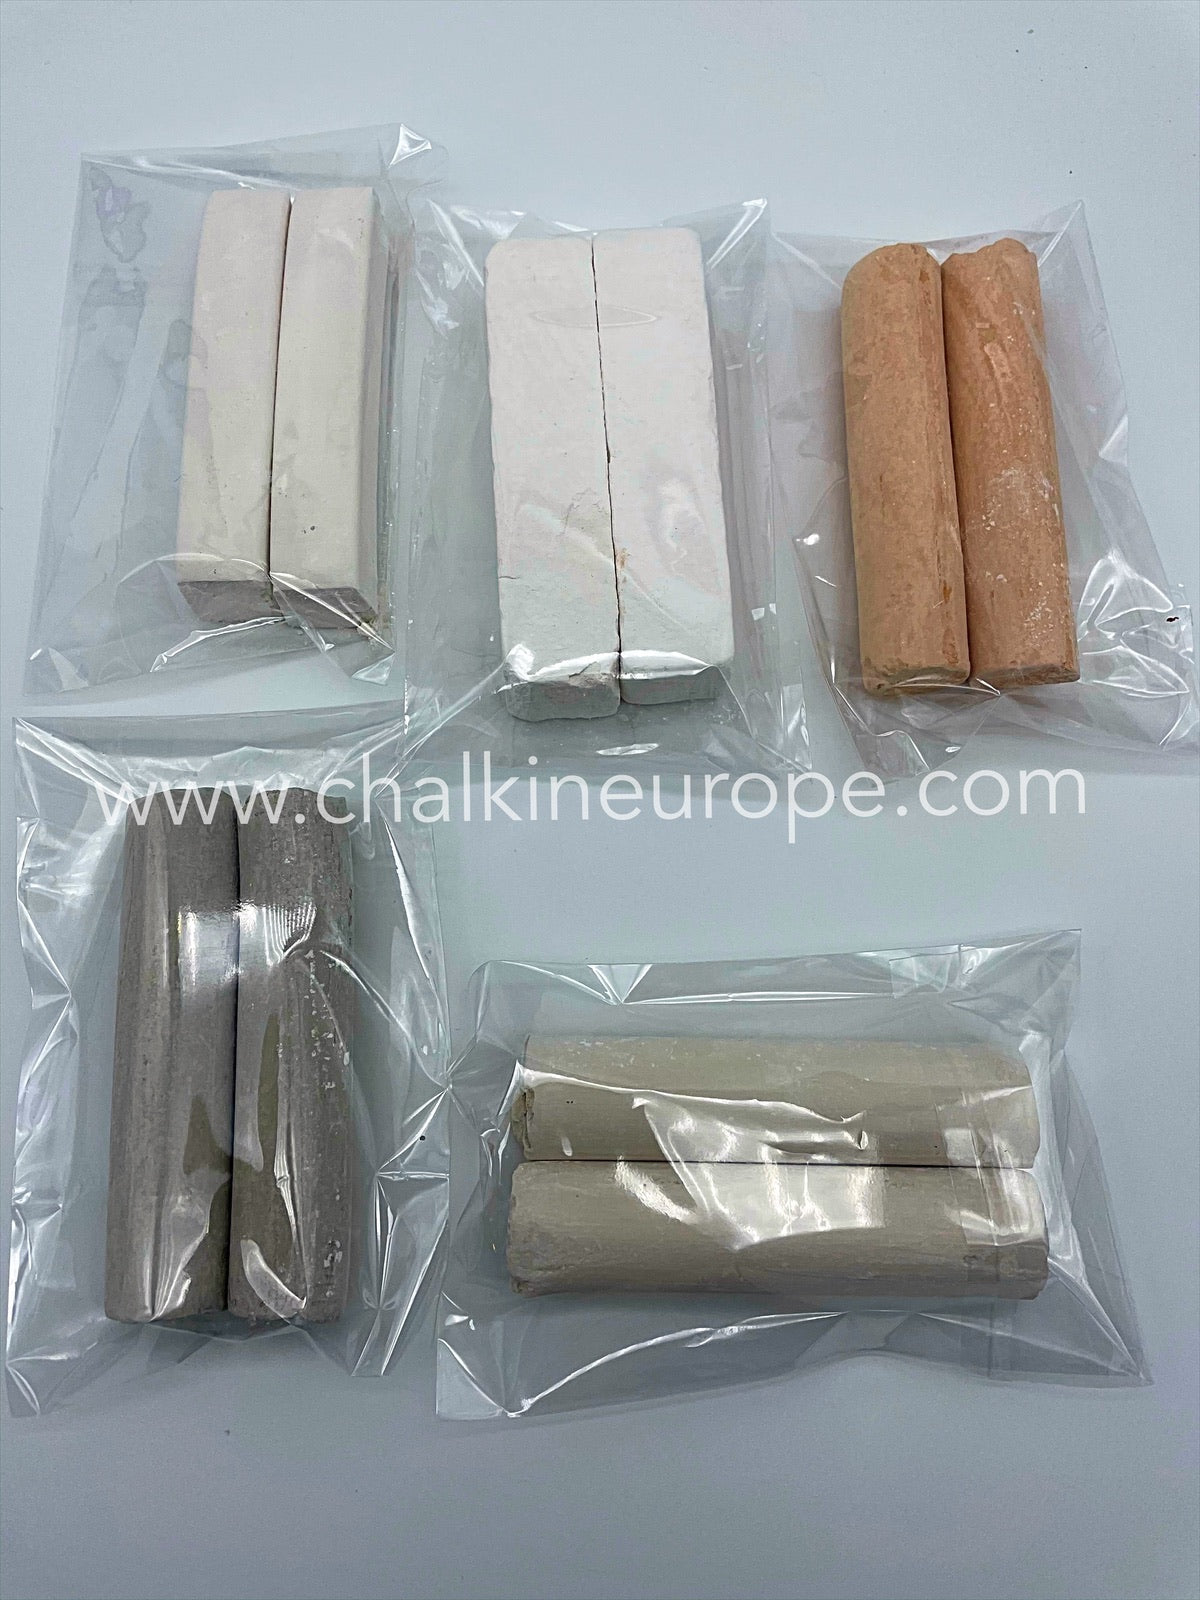 Types of edible clay - Chalkineurope